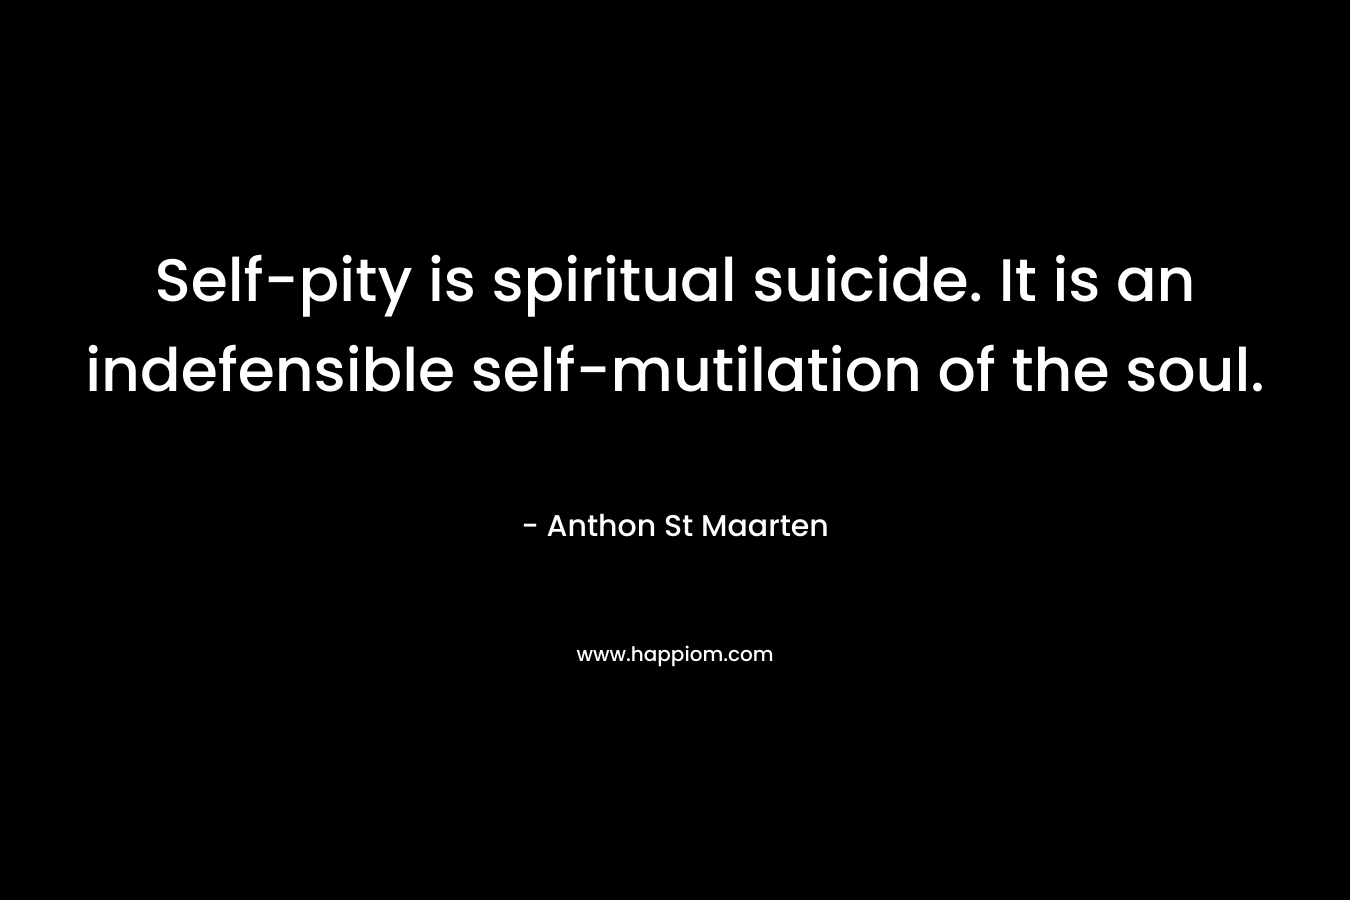 Self-pity is spiritual suicide. It is an indefensible self-mutilation of the soul.